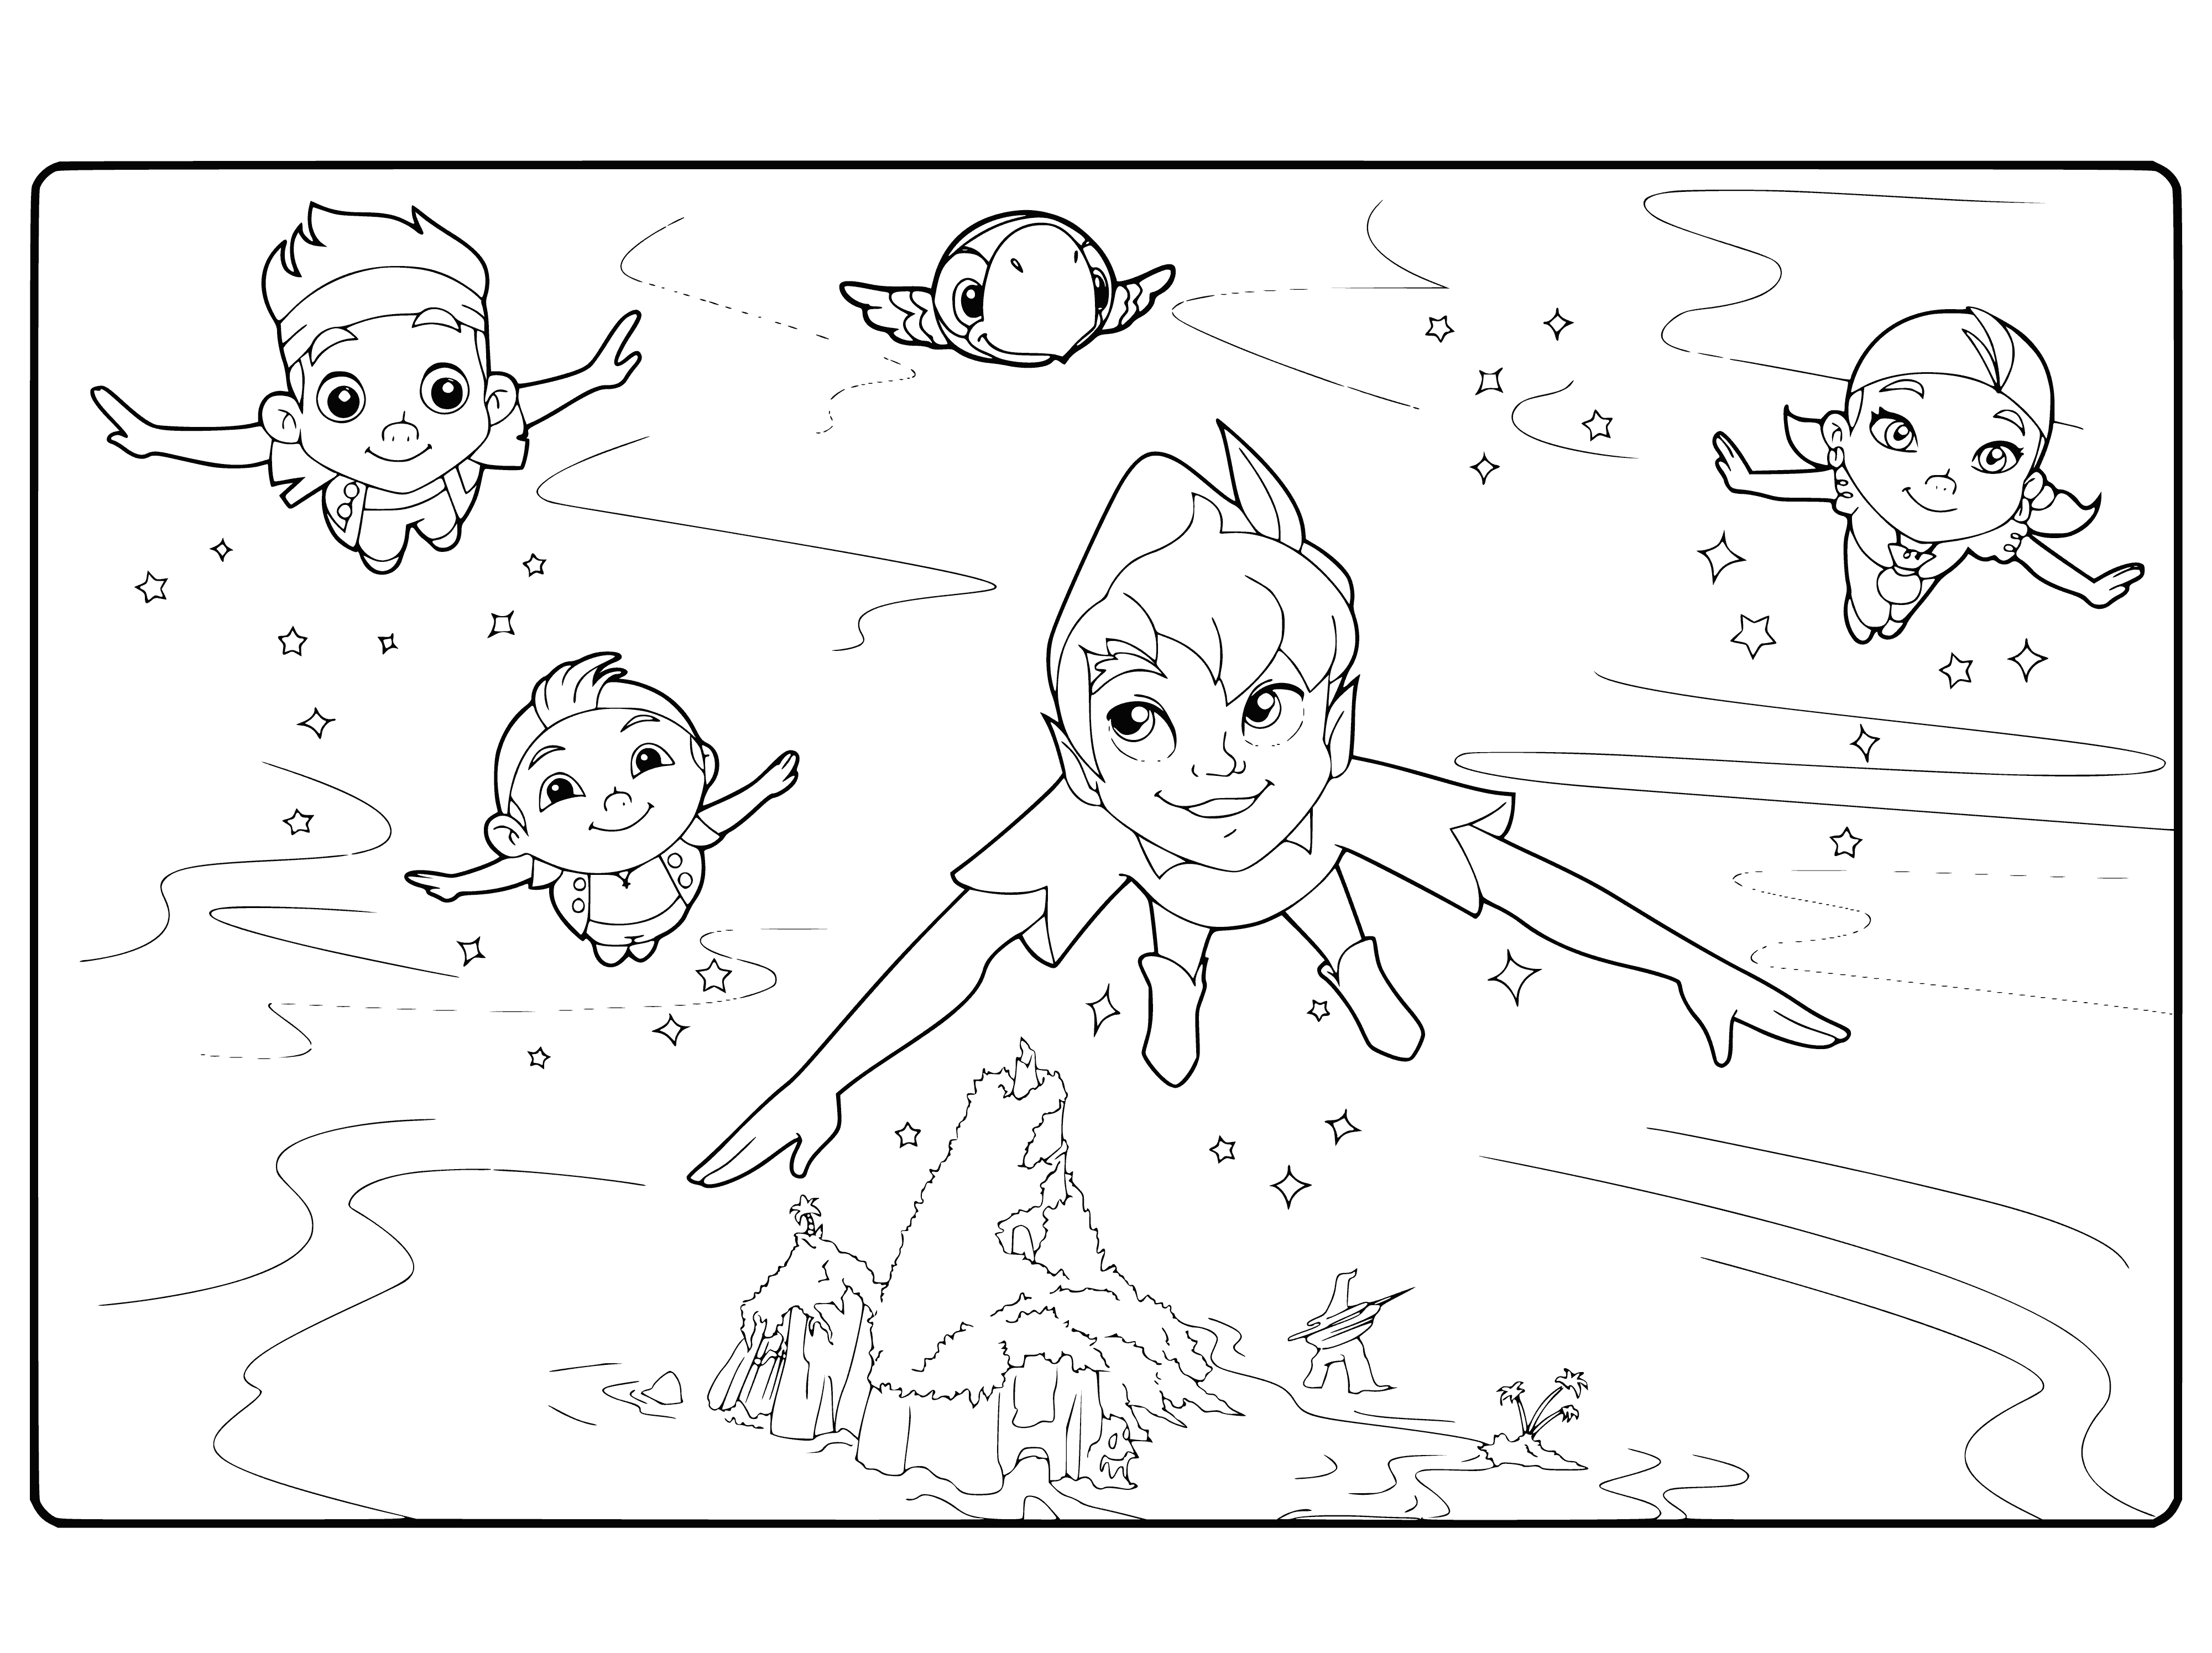 coloring page: Jake & friends explore the beach & forest. Jake gazes into the sky w/telescope. His friends admire him and one holds a stick. Ship sails in the distance. #Exploration